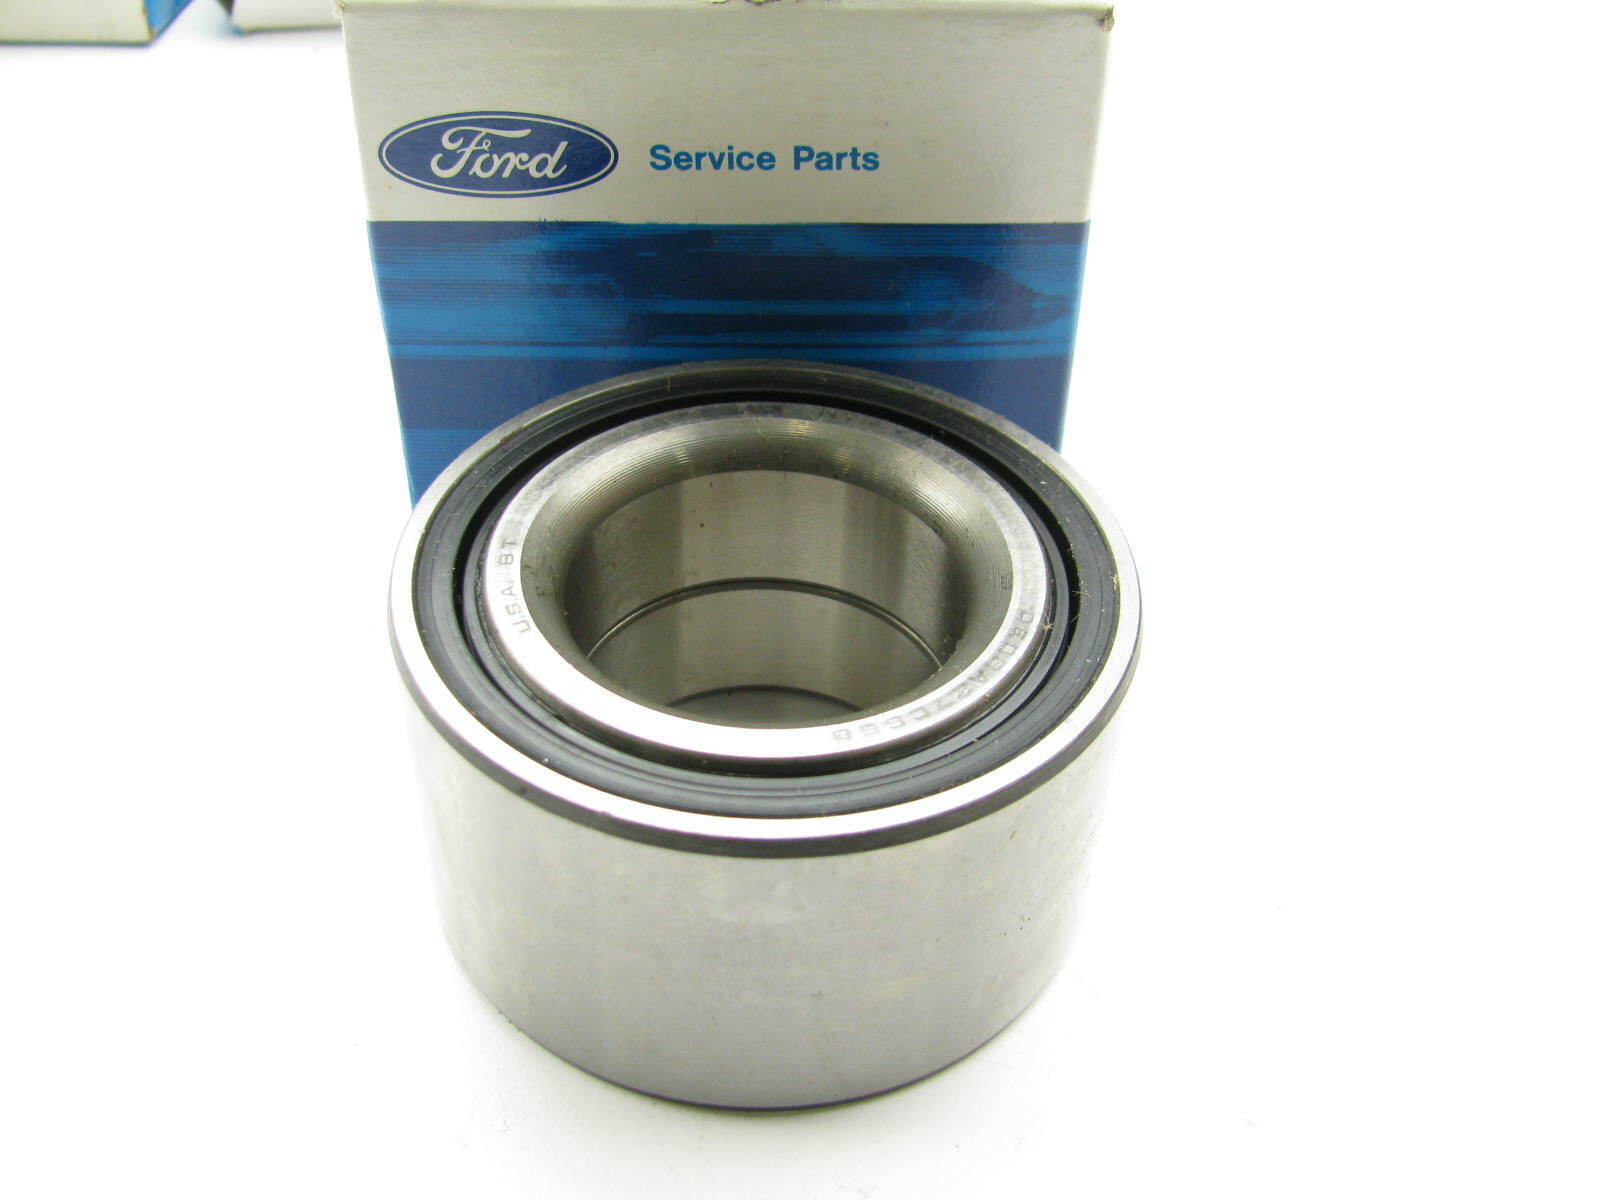 NEW - OEM Ford F7CZ-1215-AA Front Wheel Bearing 1990-2003 Escort 1991-96 Tracer